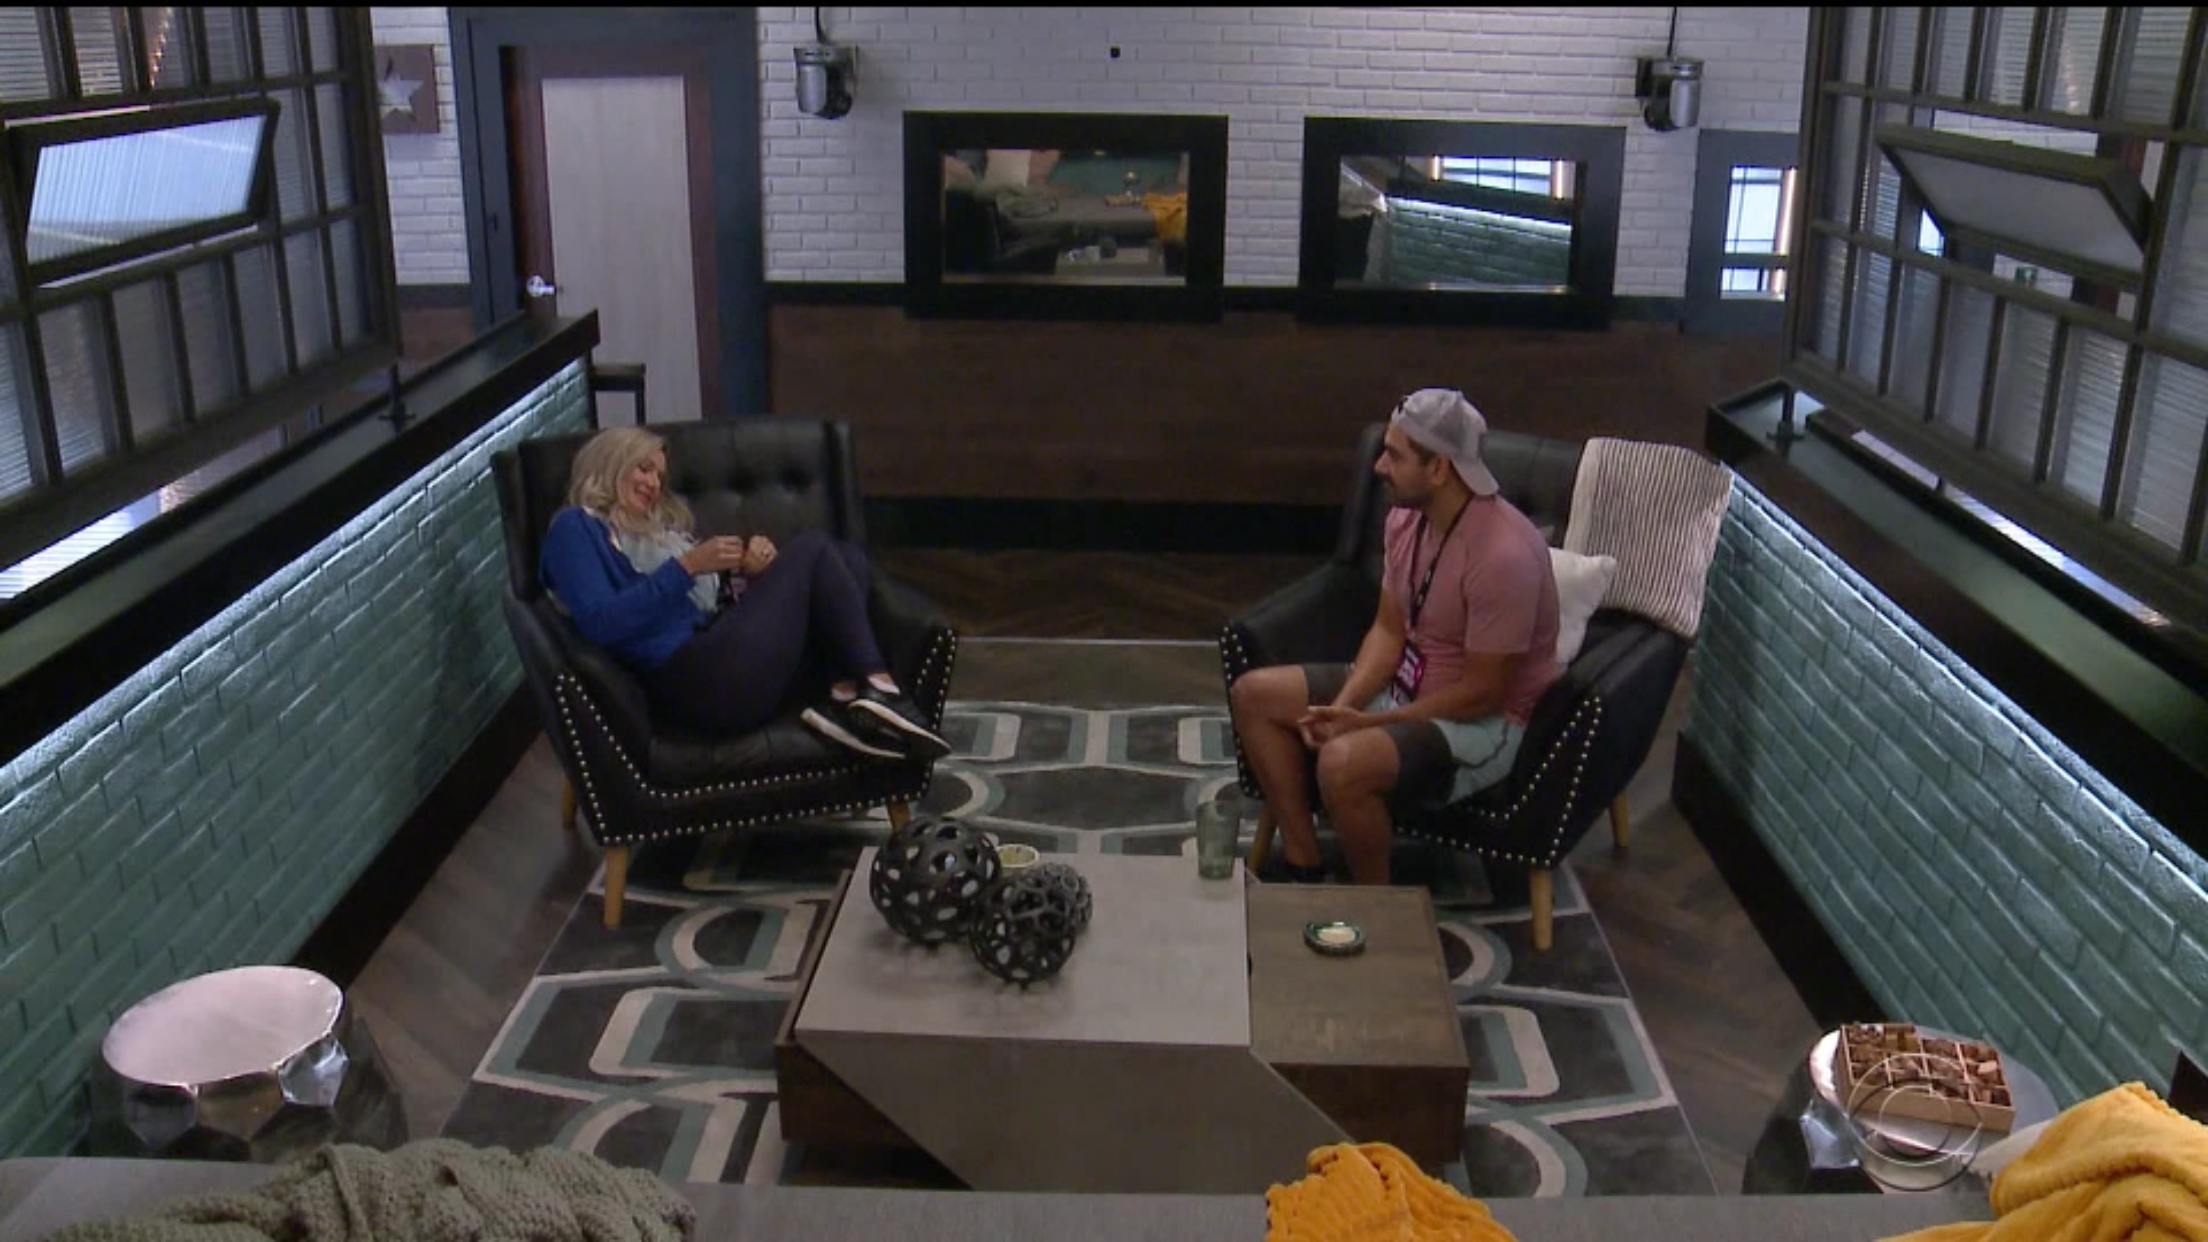 More strategizing from Kaysar and Janelle